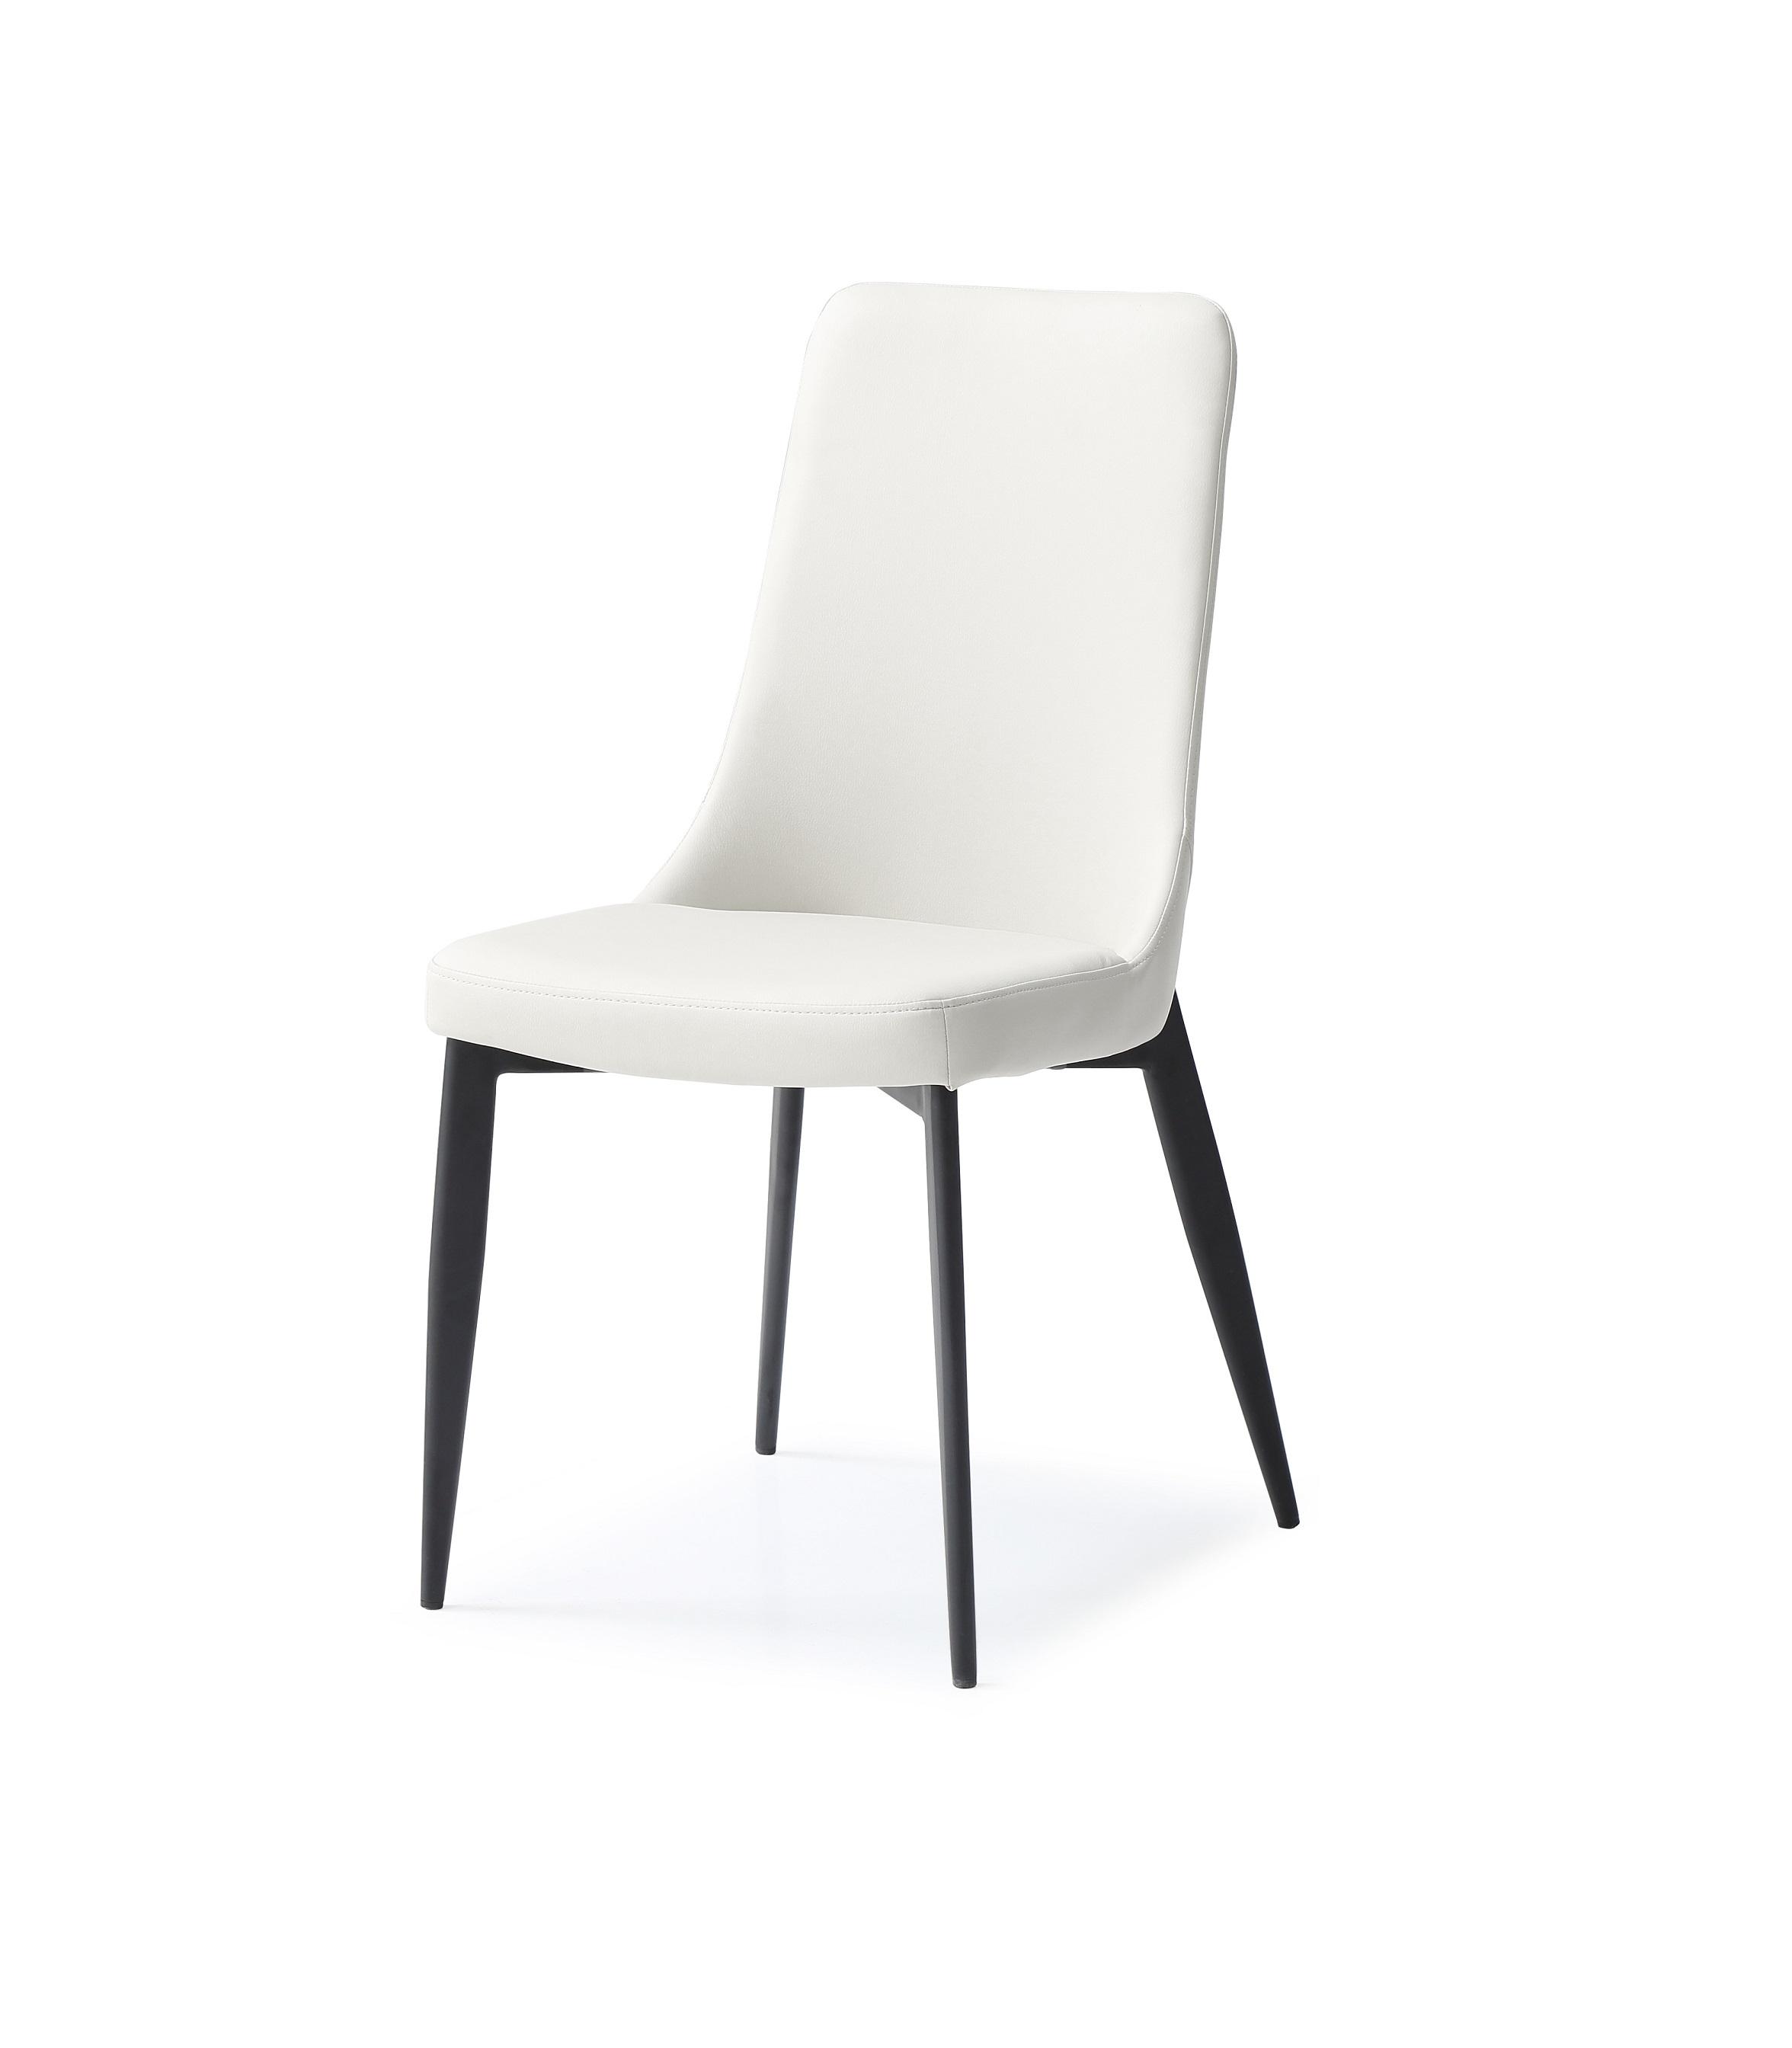 Modern Dining Chair Set DC1472-WHT Luca DC1472-WHT in White Leather